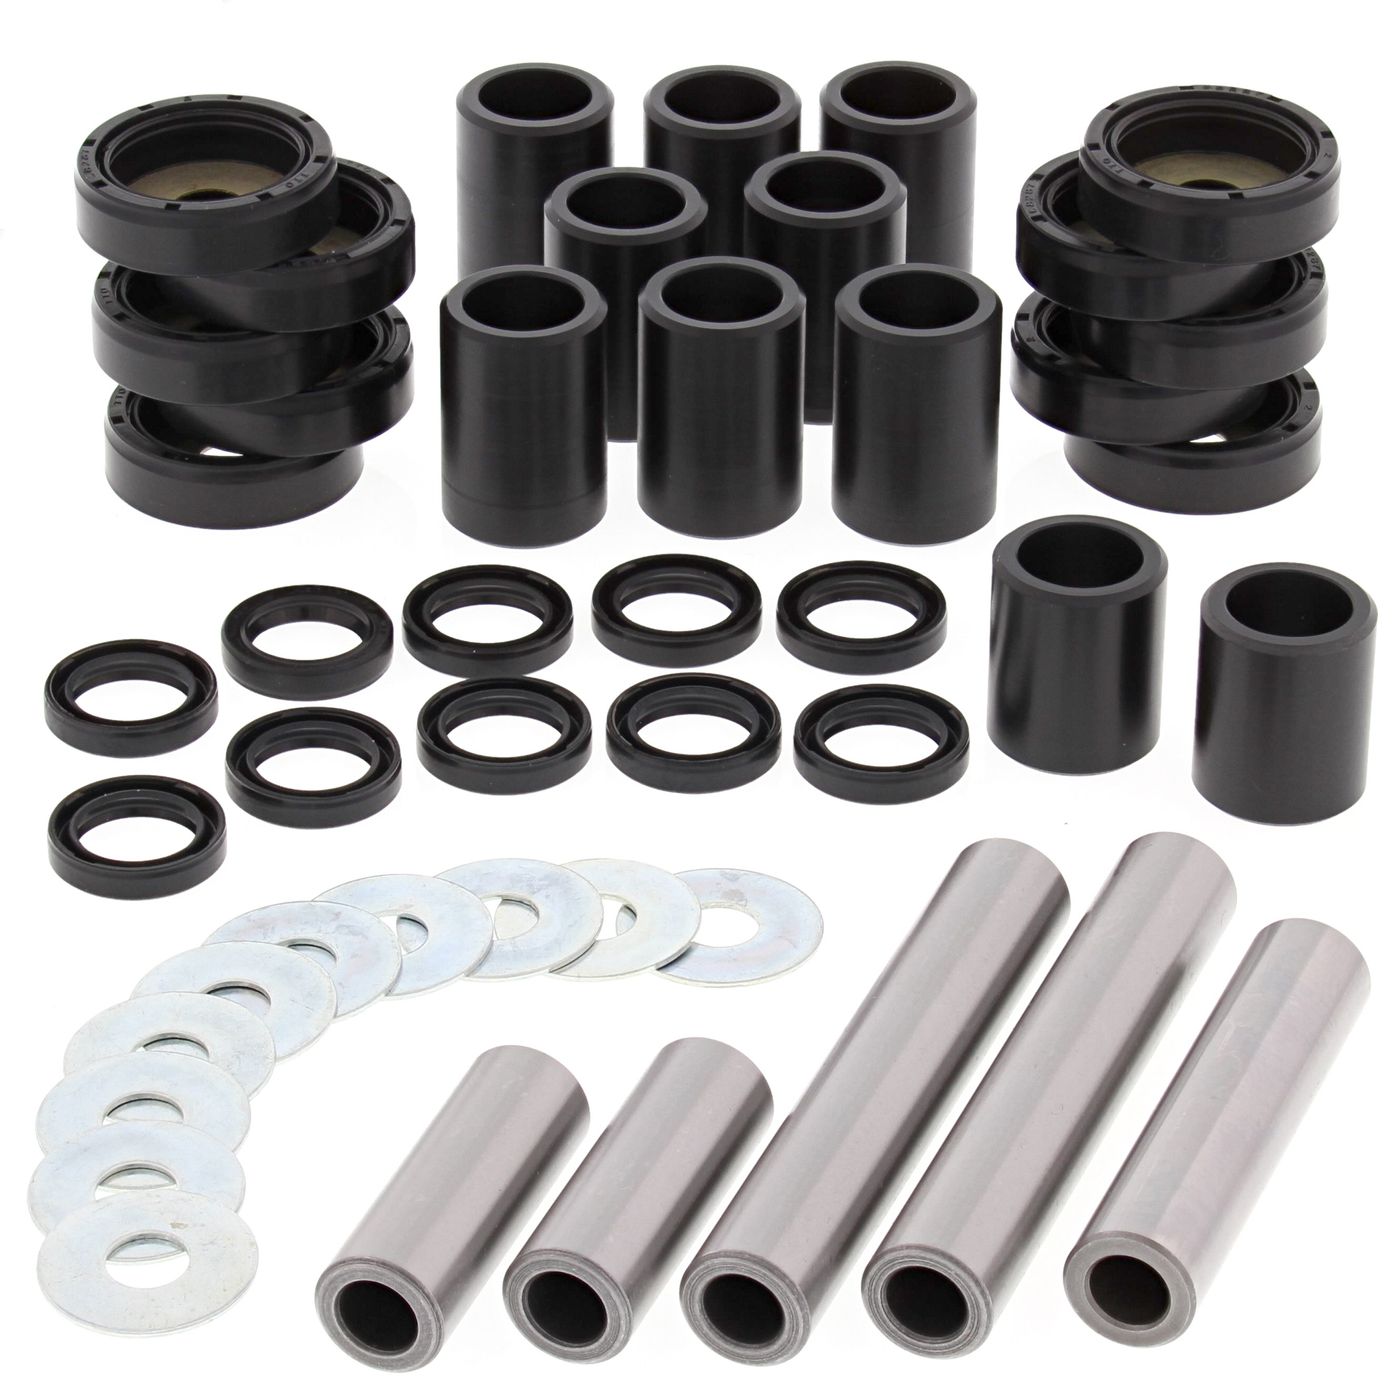 Wrp Rear Ind. Suspension Kits - WRP501075 image